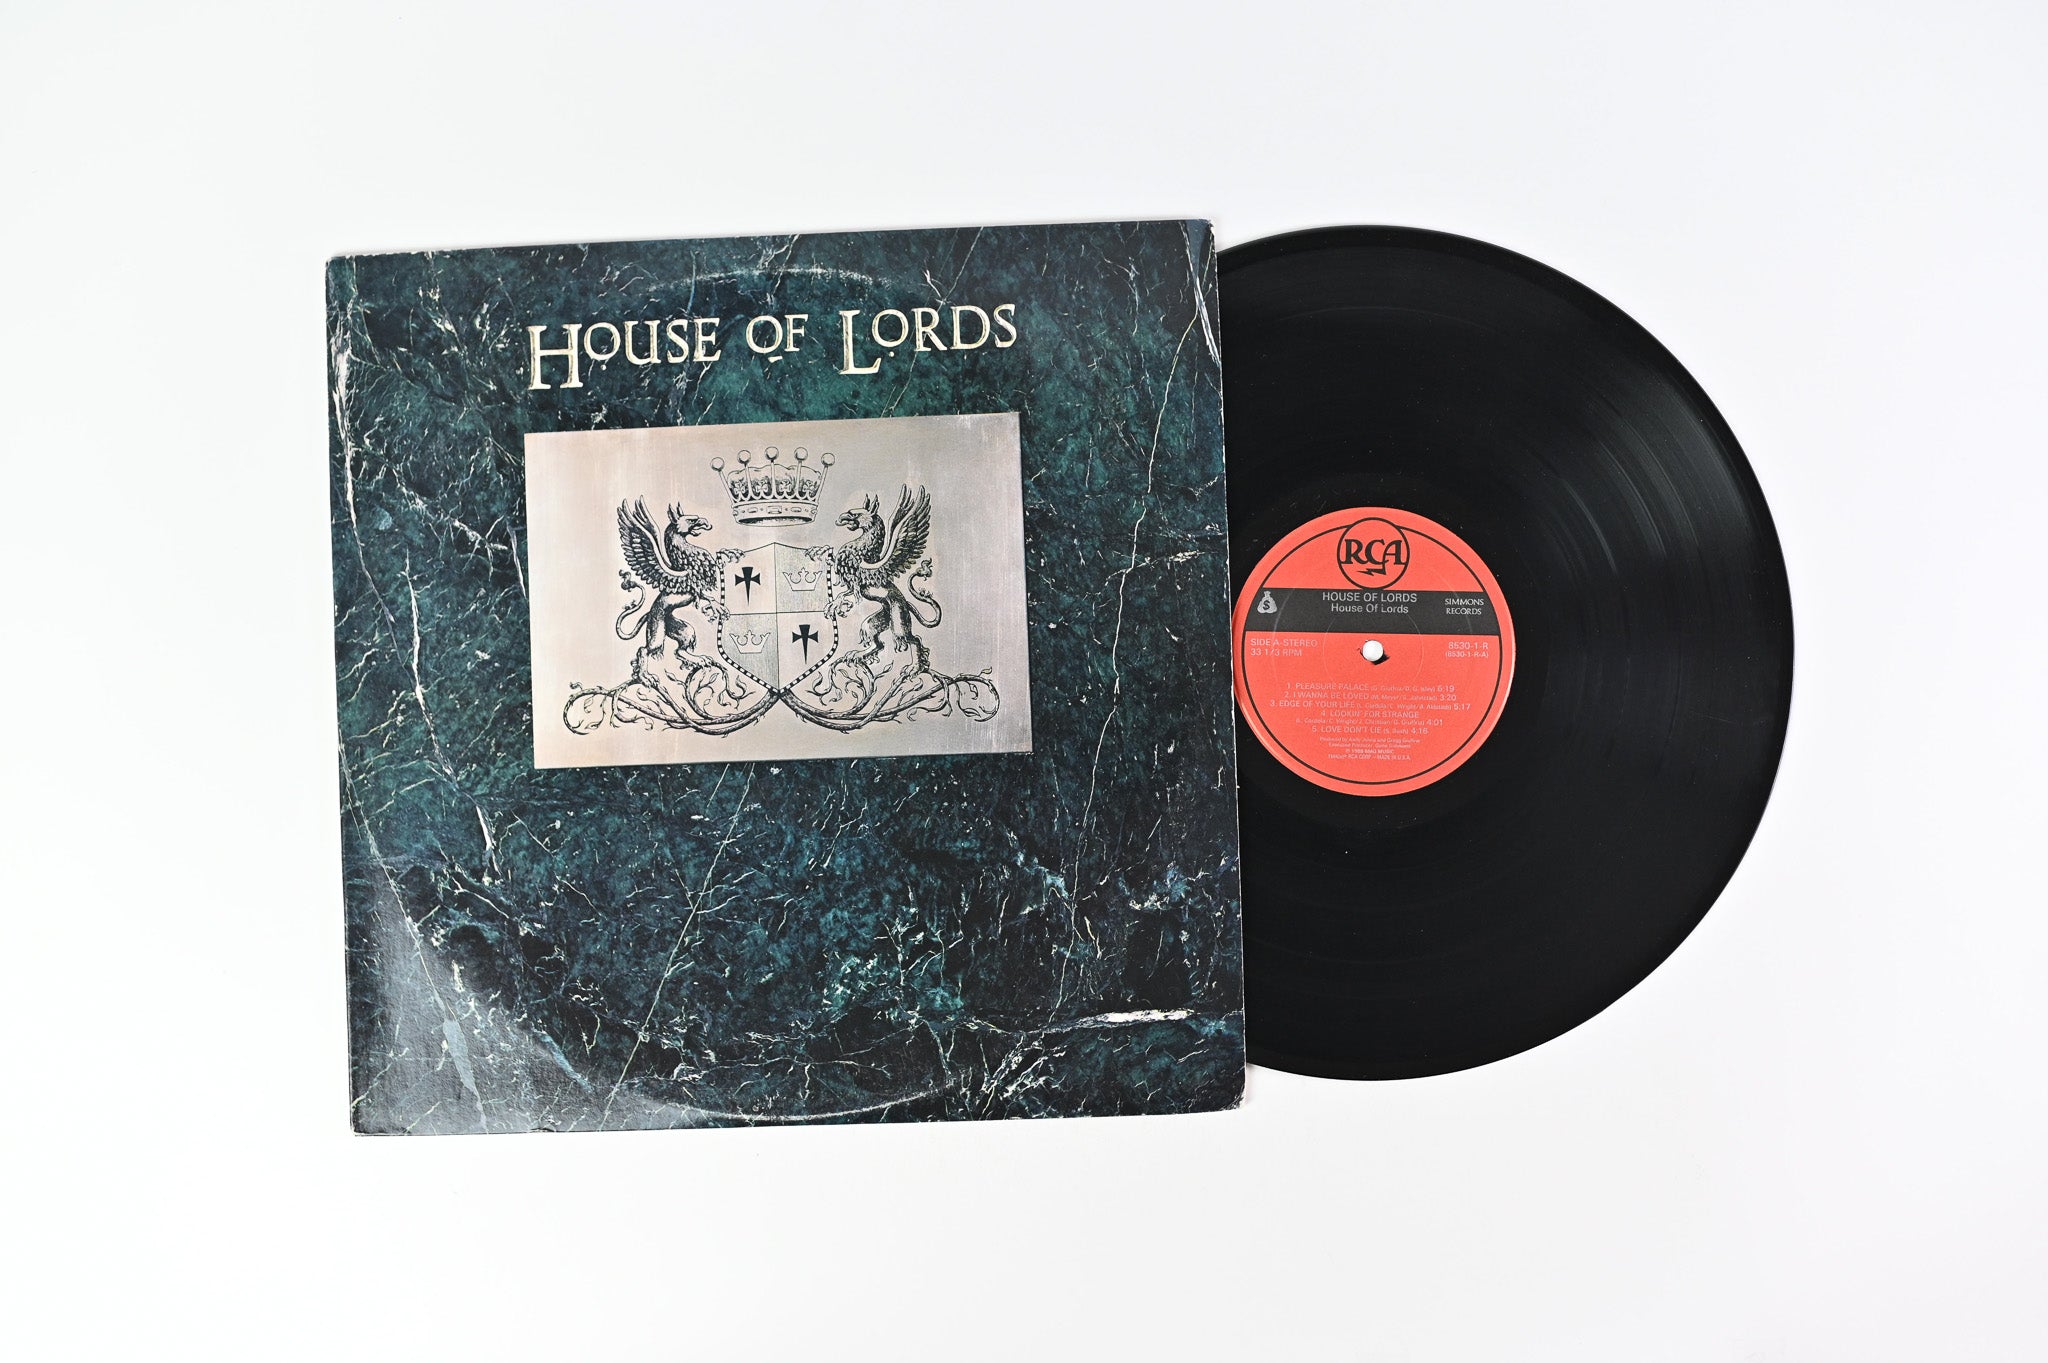 House Of Lords - House Of Lords on RCA